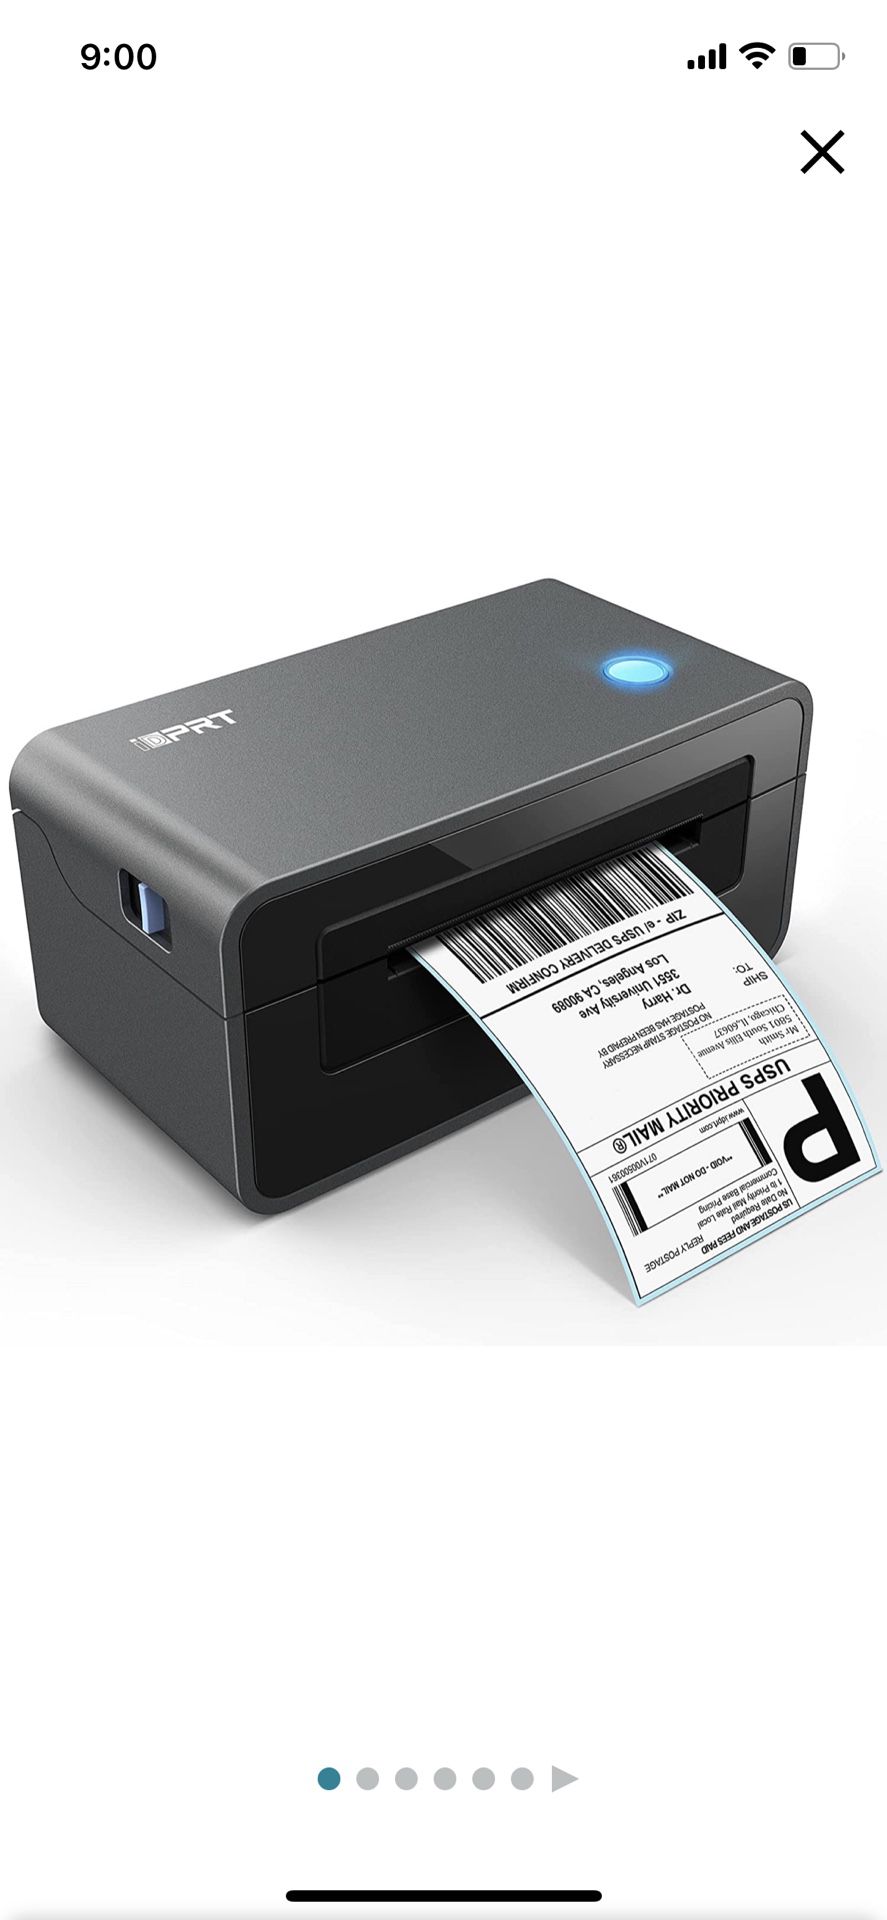 Thermal Label Printer - iDPRT SP410 Thermal Shipping Label Printer, 4x6 Label Printer, Thermal Label Maker, Compatible with Shopify, Ebay, UPS, USPS, 